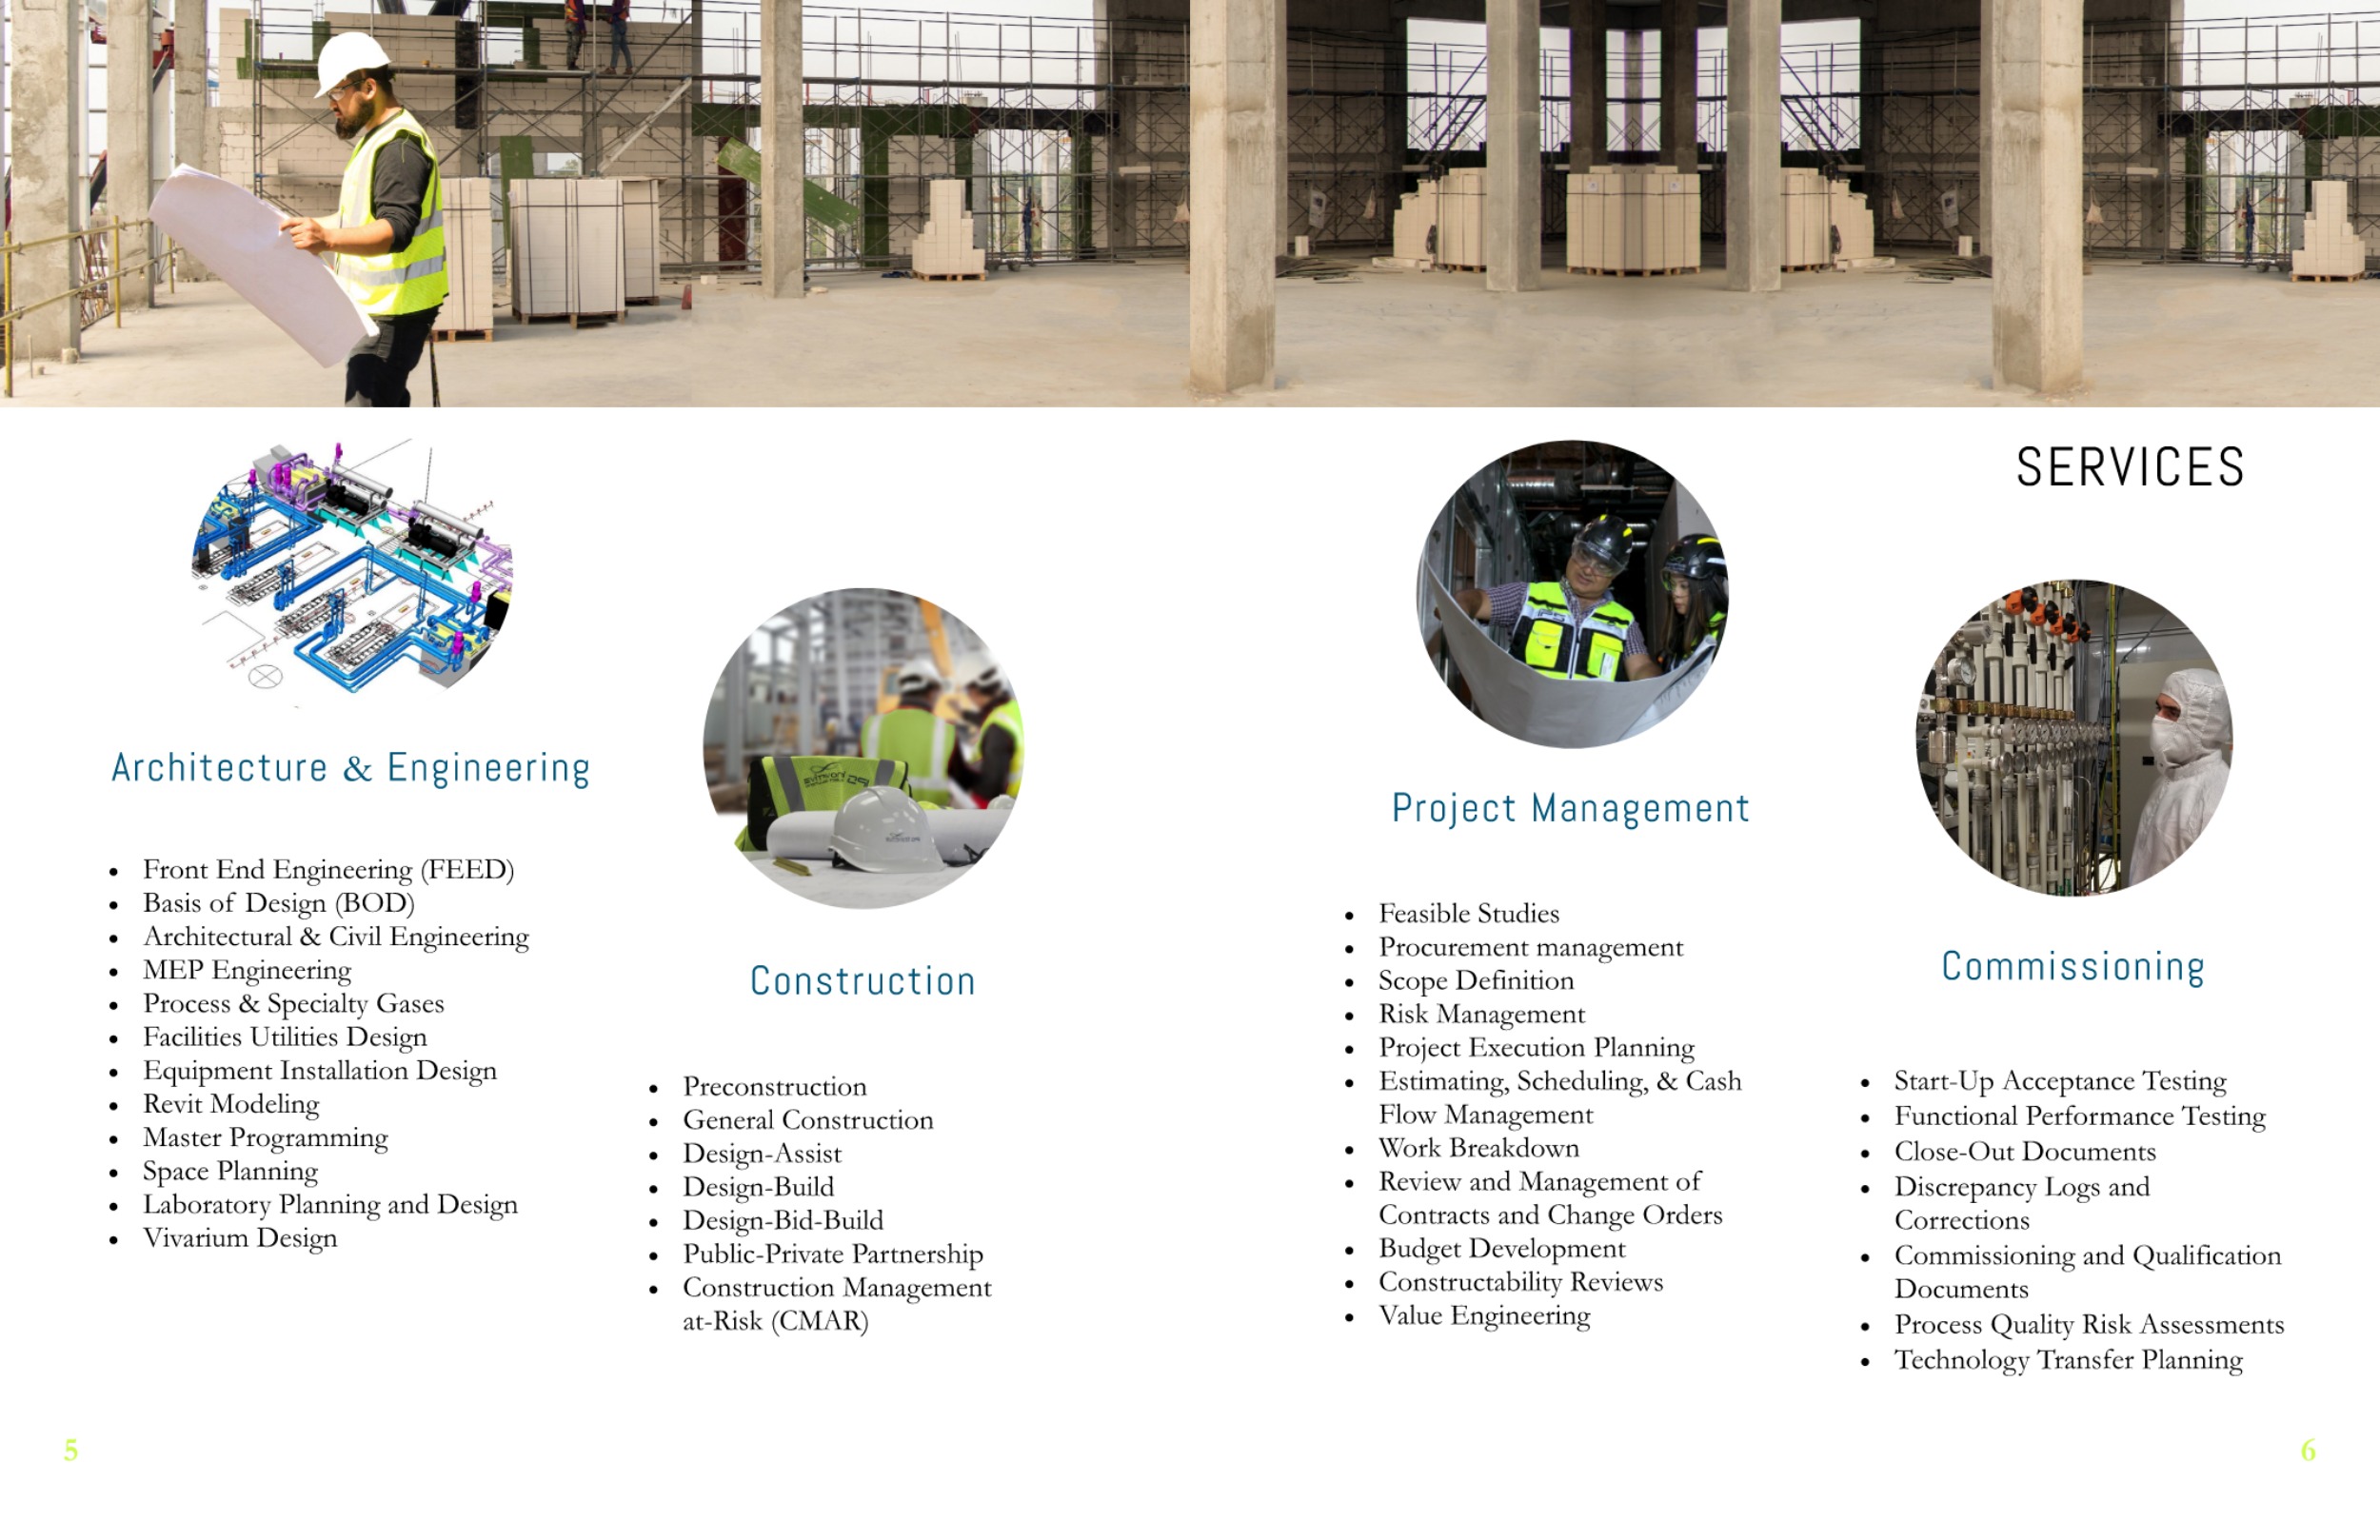 IPS Capabilities Booklet spread with detailed services for Architecture, Engineering, General Construction, Project Management, and Commissioning.